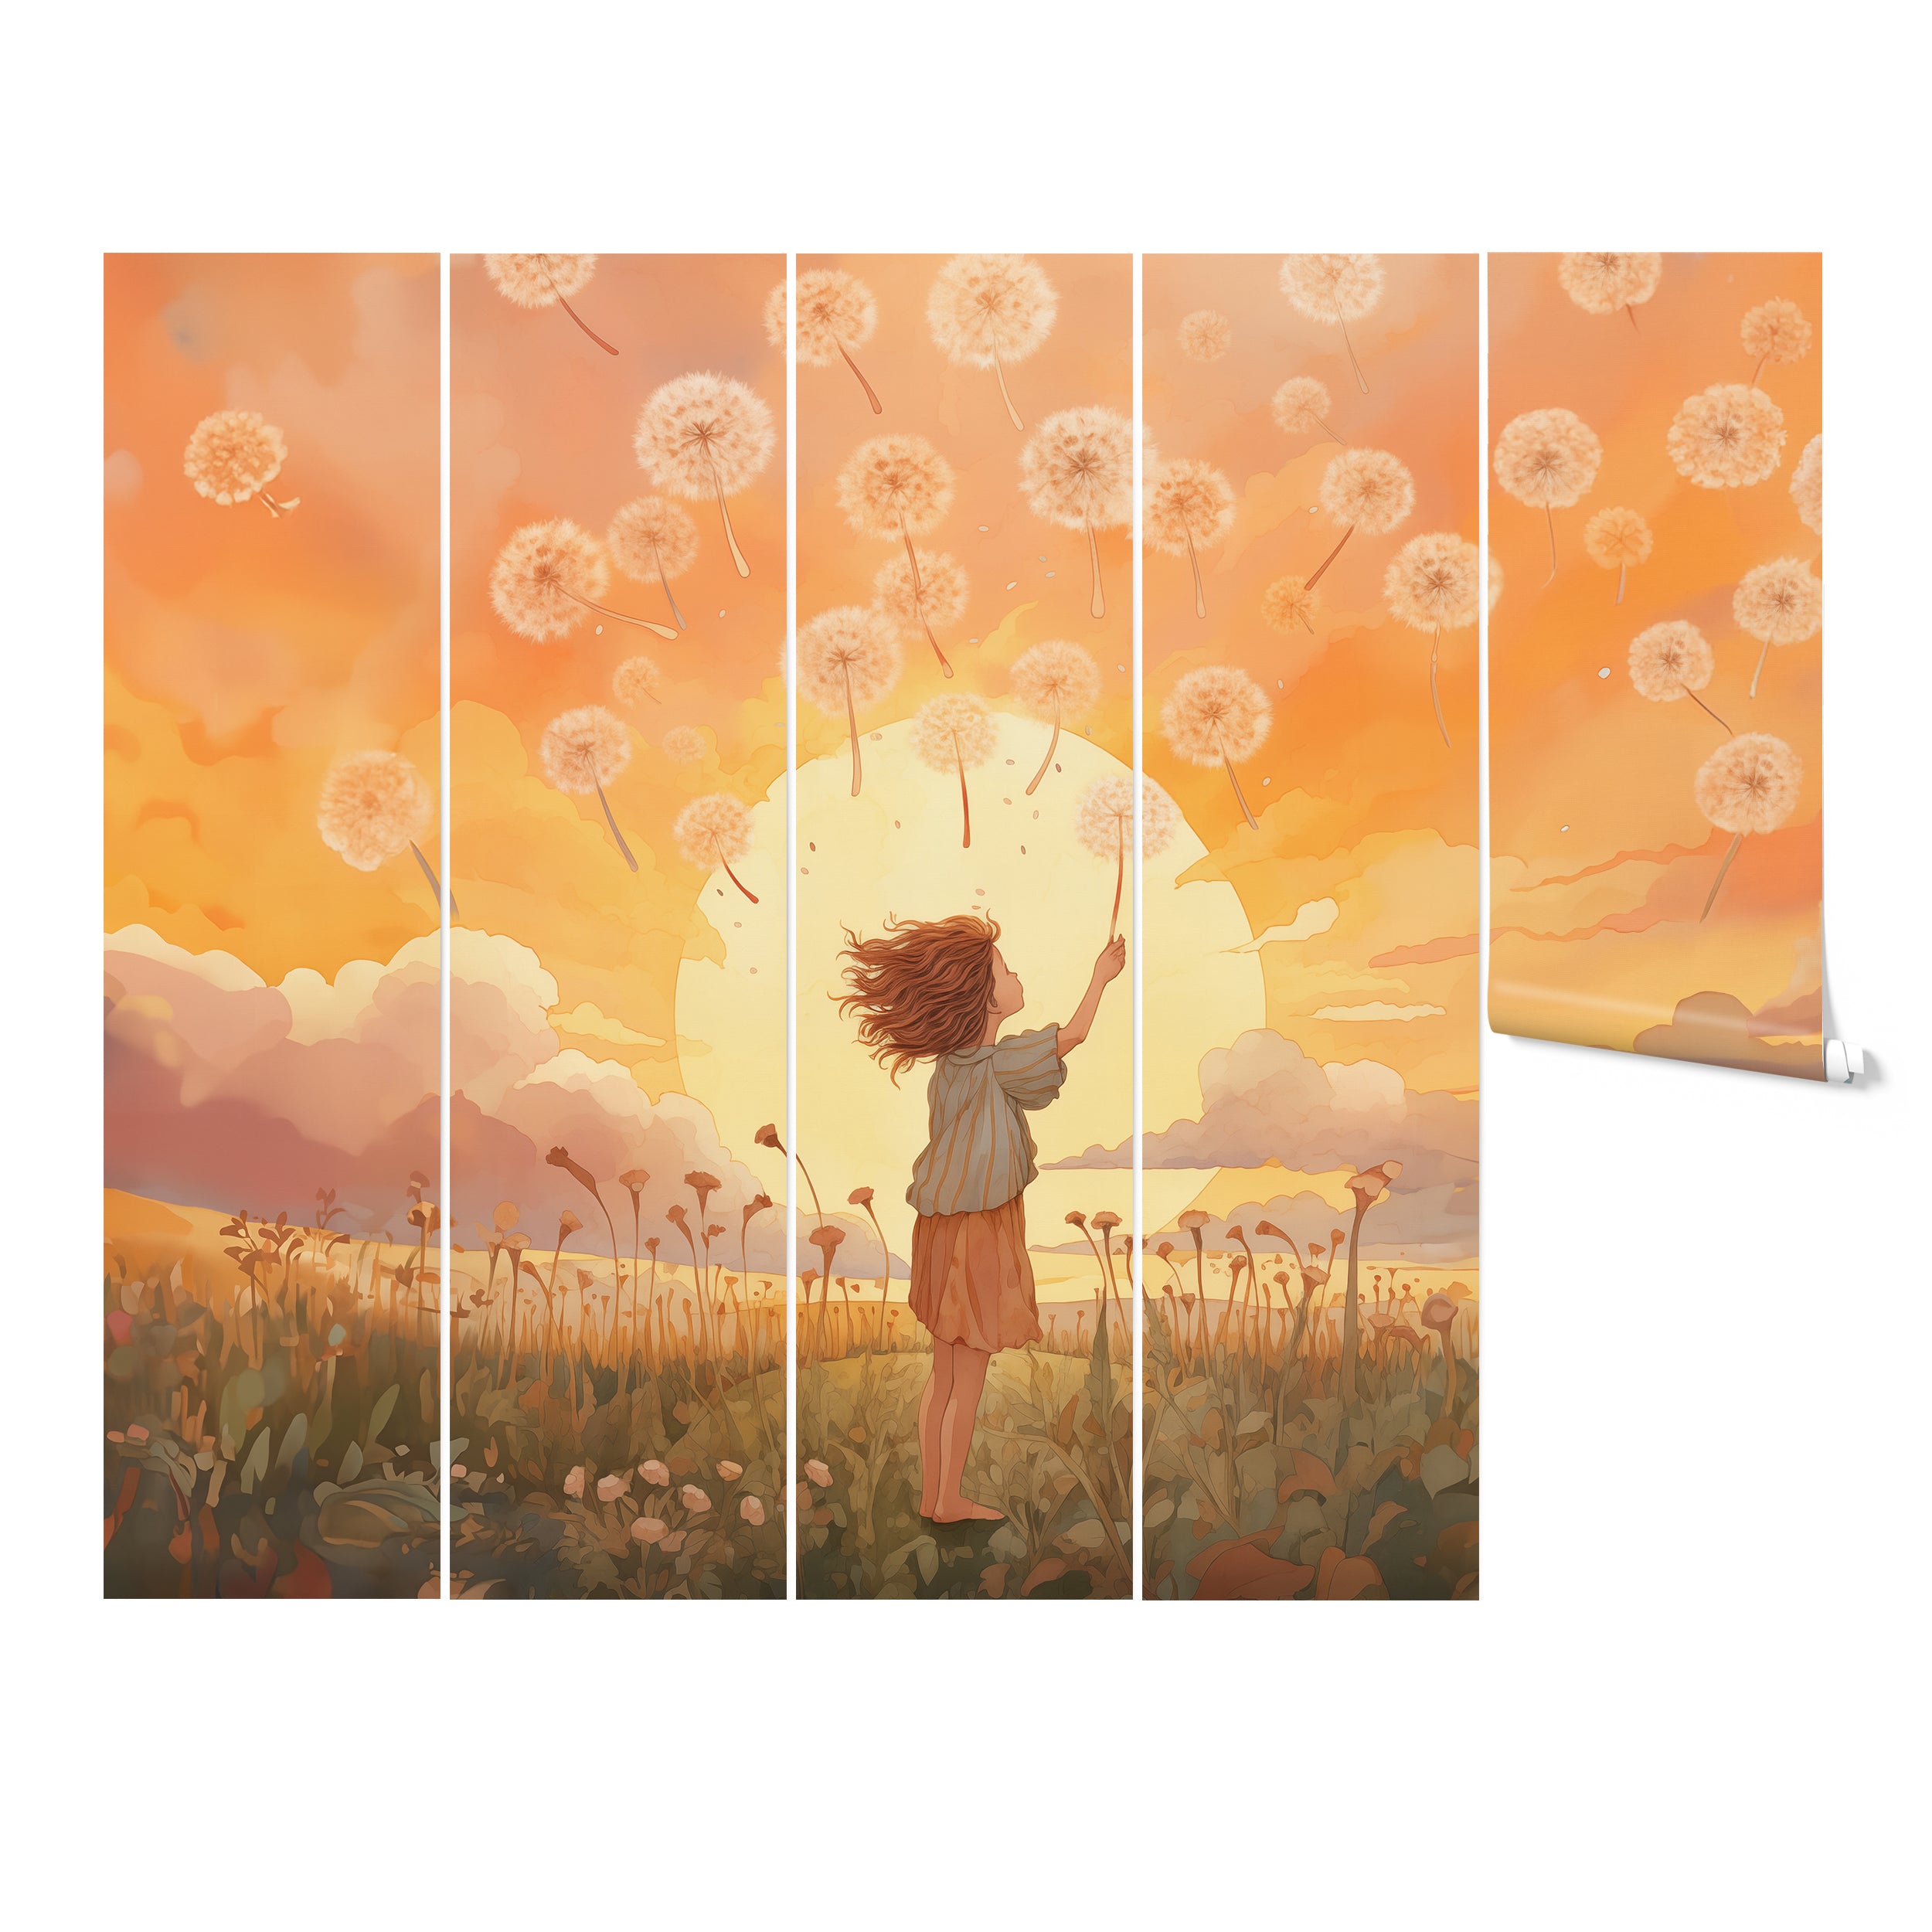 Five-panel display of 'Make a Wish Mural' showing a young girl in a dandelion field with a sunset backdrop."